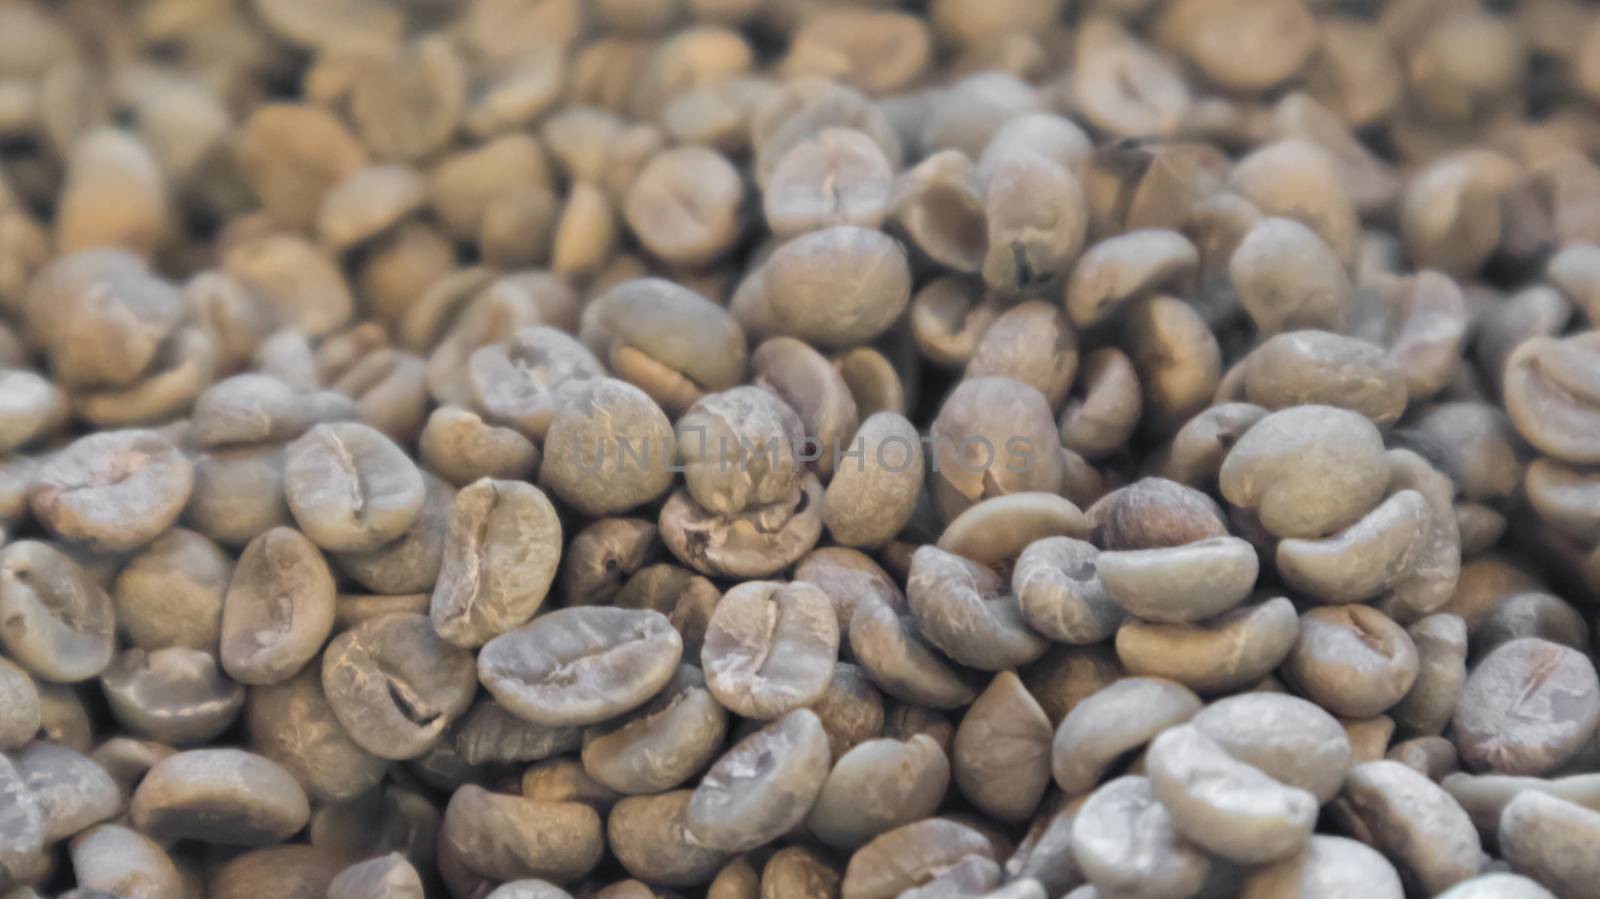 Close up raw coffee beans unroasted background and texture conce by pt.pongsak@gmail.com